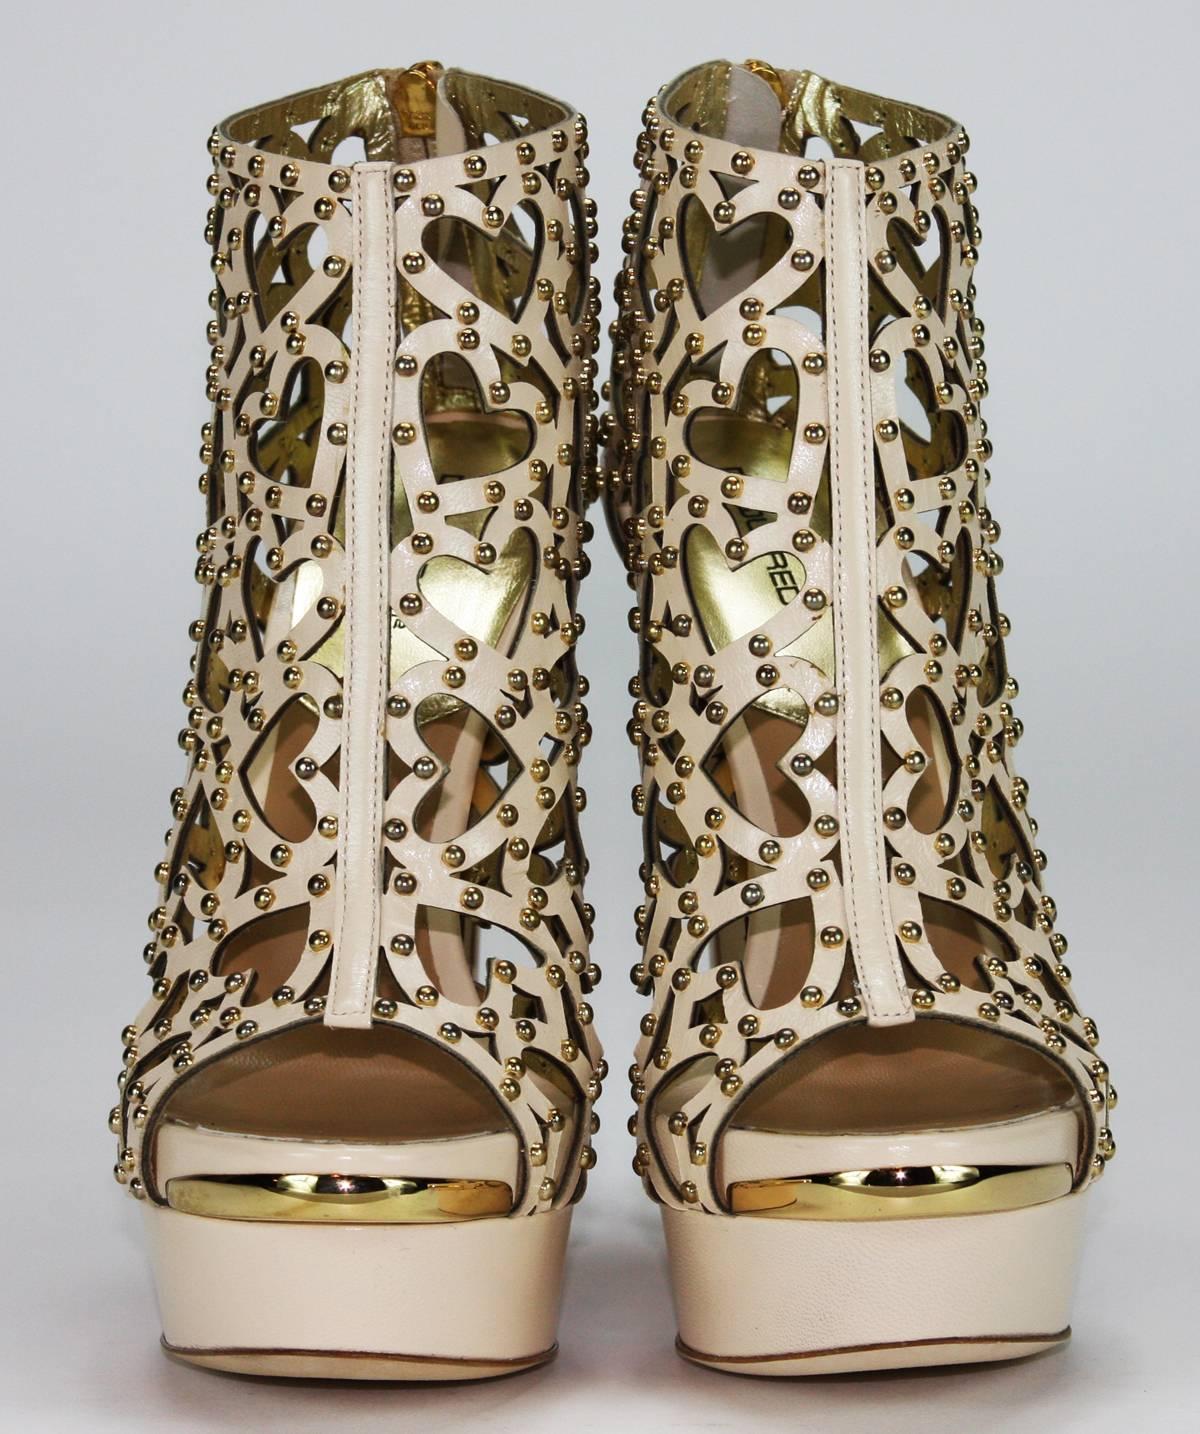 New $2150 DSQUARED2 Heart Cut Out Studded Platform Leather Beige Boots 38 - 8 1